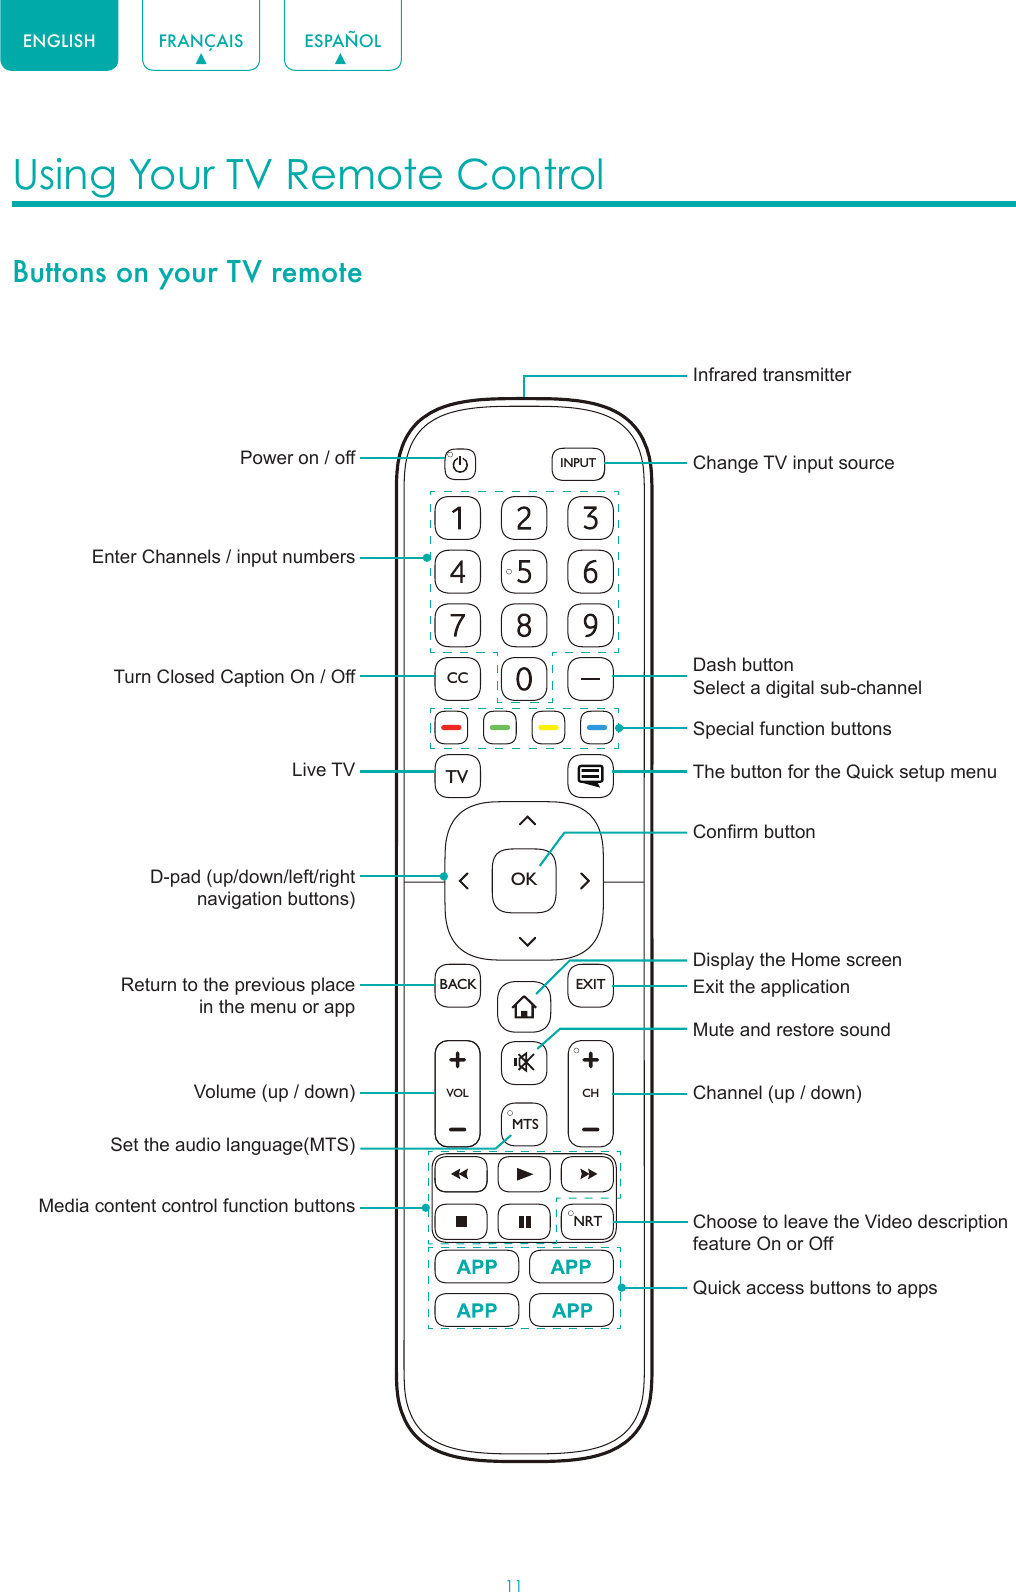 11ENGLISH FRANÇAIS ESPAÑOLUsing Your TV Remote Control Buttons on your TV remoteVOLCHOKCCBACKTVEXITINPUTMTSNRTPower on / offEnter Channels / input numbersMedia content control function buttonsDash button Select a digital sub-channelD-pad (up/down/left/right navigation buttons)Volume (up / down)Set the audio language(MTS)Choose to leave the Video description feature On or OffLive TVReturn to the previous place in the menu or appMute and restore soundInfrared transmitterChange TV input sourceChannel (up / down)Exit the applicationTurn Closed Caption On / OffSpecial function buttonsThe button for the Quick setup menuDisplay the Home screenConirm buttonQuick access buttons to apps